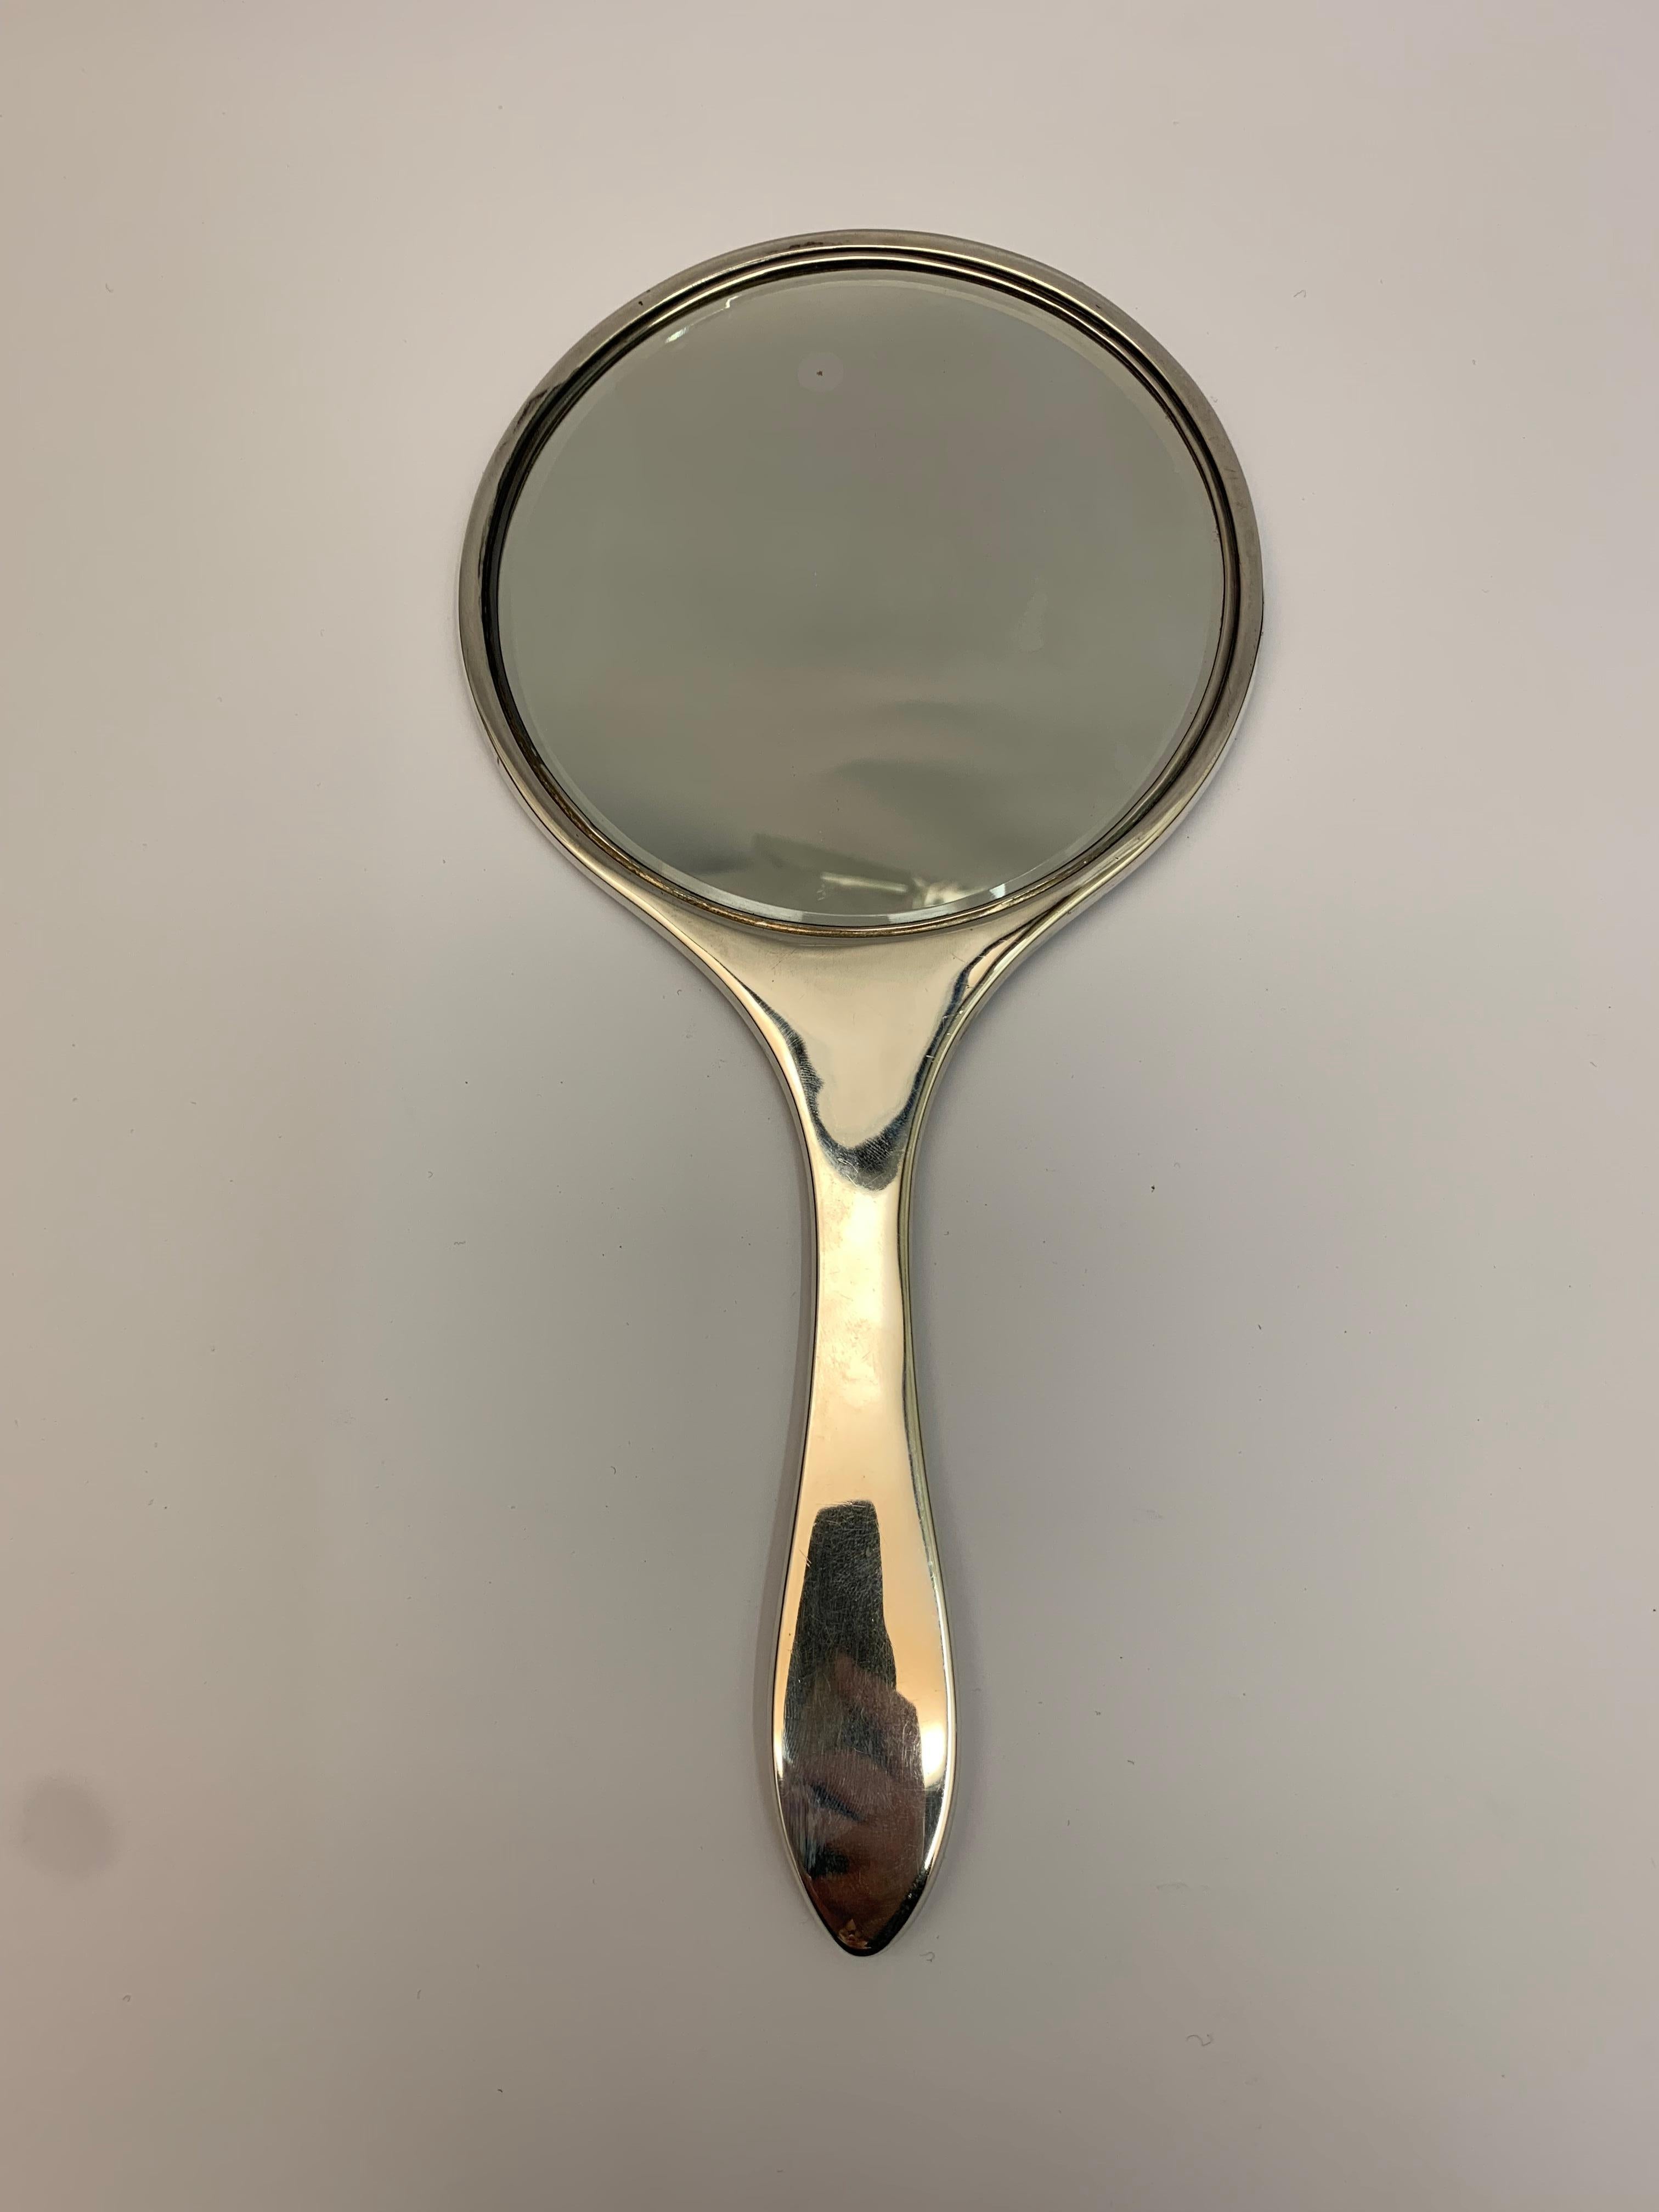 A large Art Deco antique silver hand mirror, made in Birmingham in 1922.